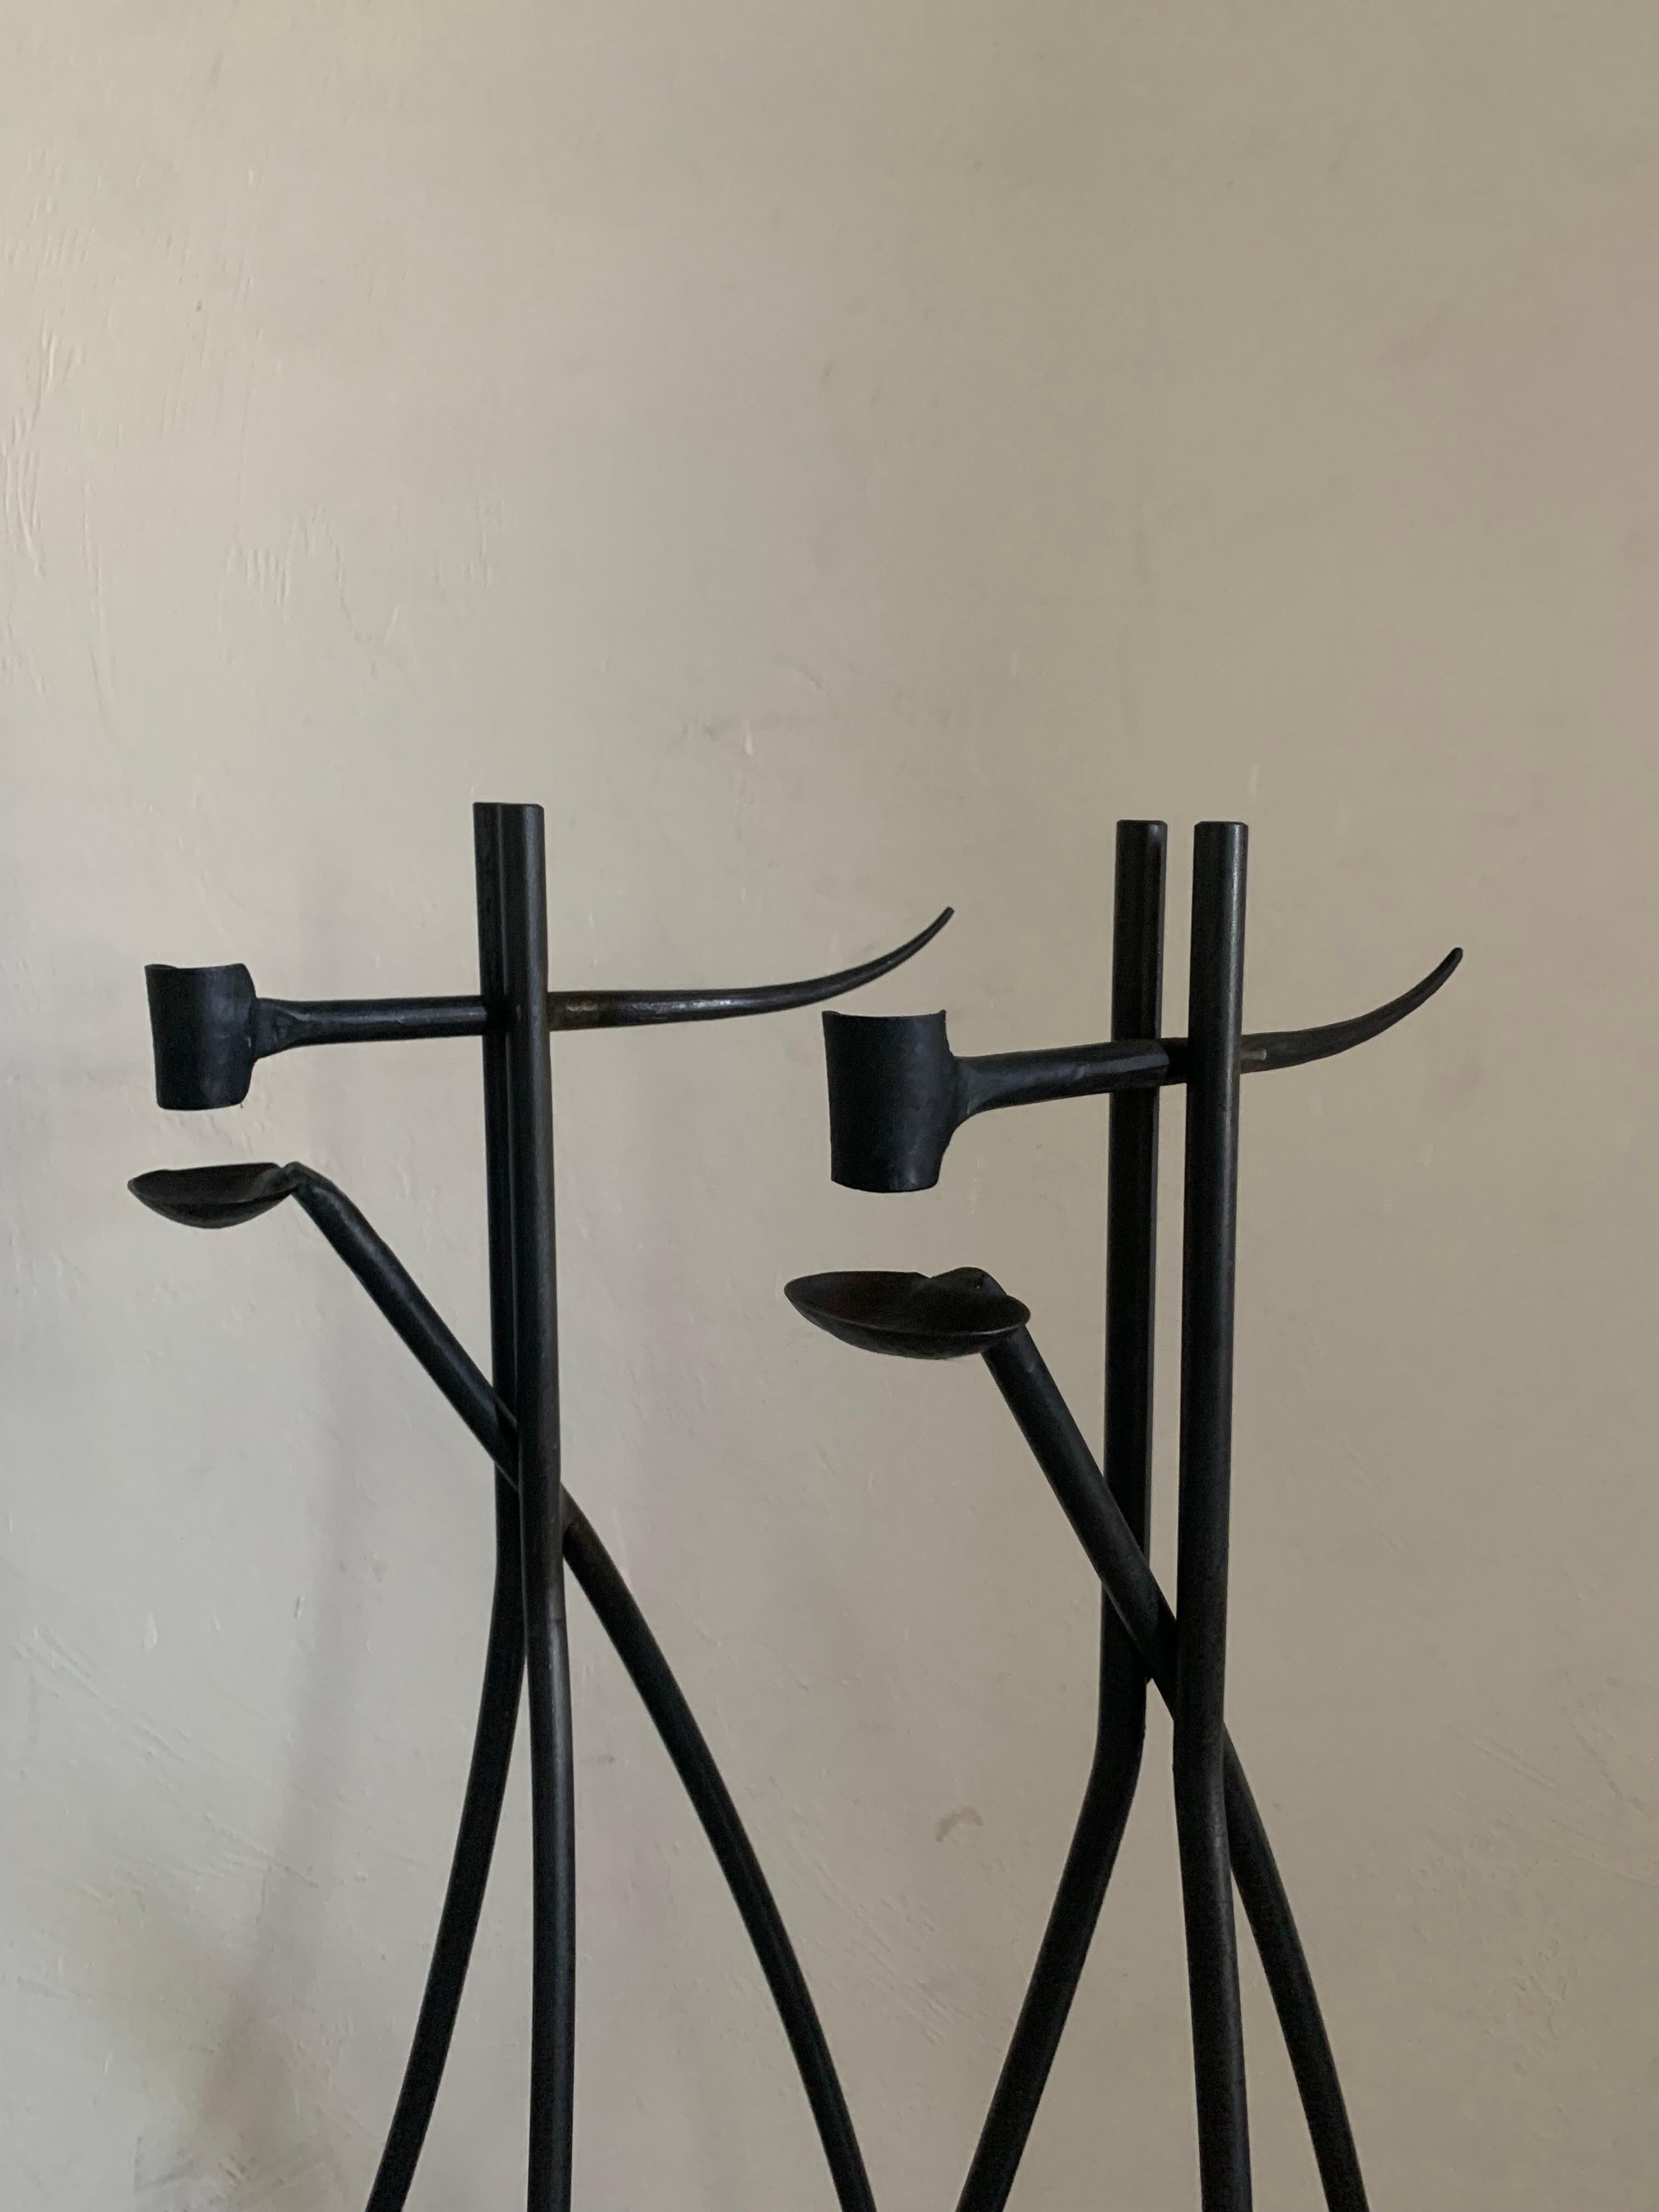 Beautiful pair of hand Forged iron candlesticks. European in nature, likely French. Uncertain of age but appearance suggests early 20th century. 

Exceptional blend of modernism with traditional craftsmanship. 